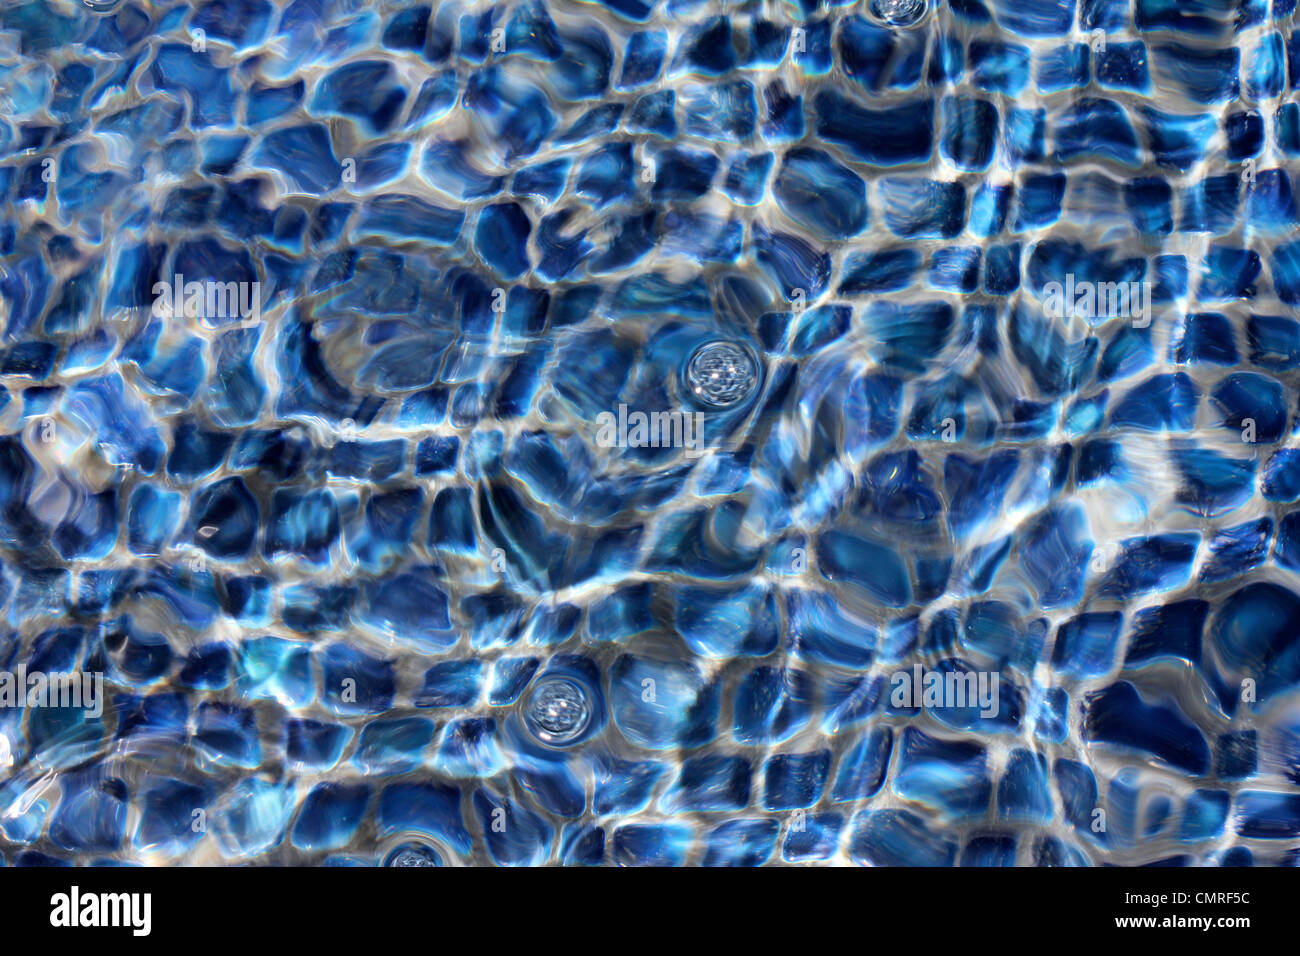 Clear water bubbling over blue and white tiles Stock Photo